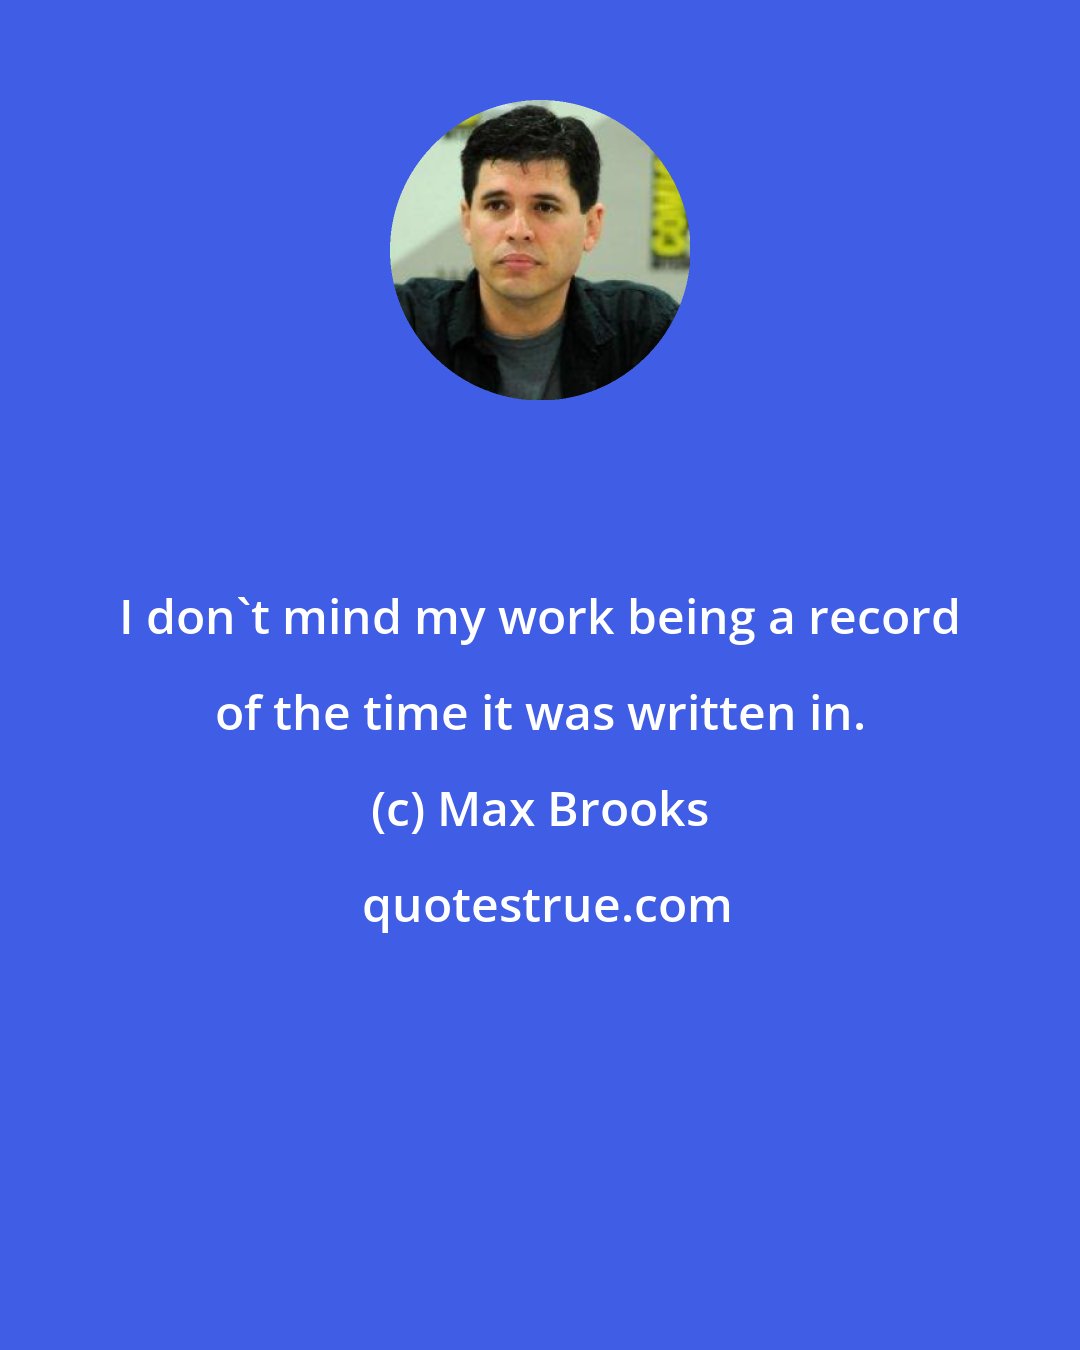 Max Brooks: I don't mind my work being a record of the time it was written in.